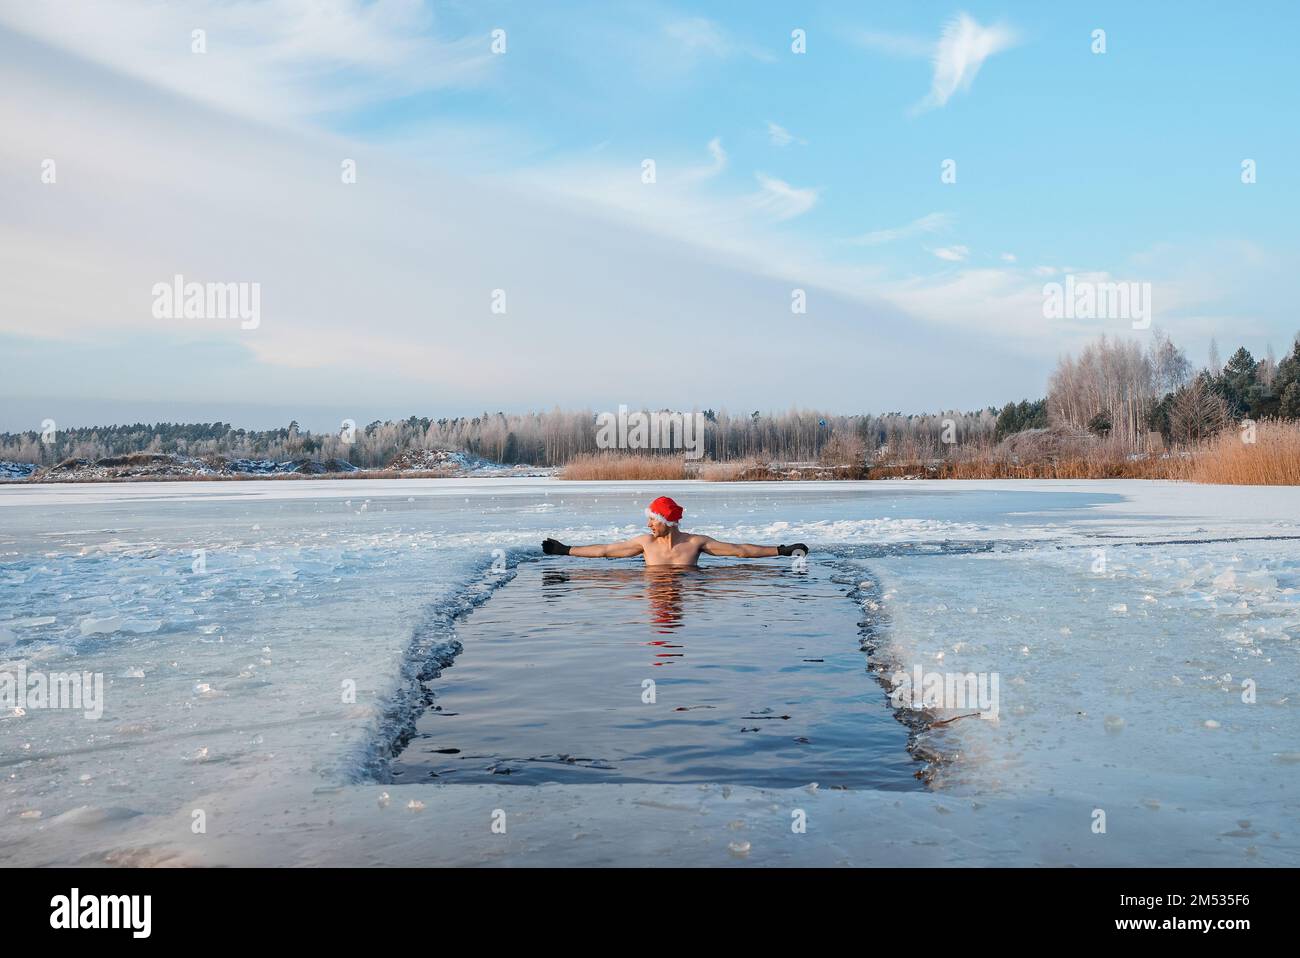 Young man in Santa's hat swimming in an ice cold water surrounded by ice. Stock Photo